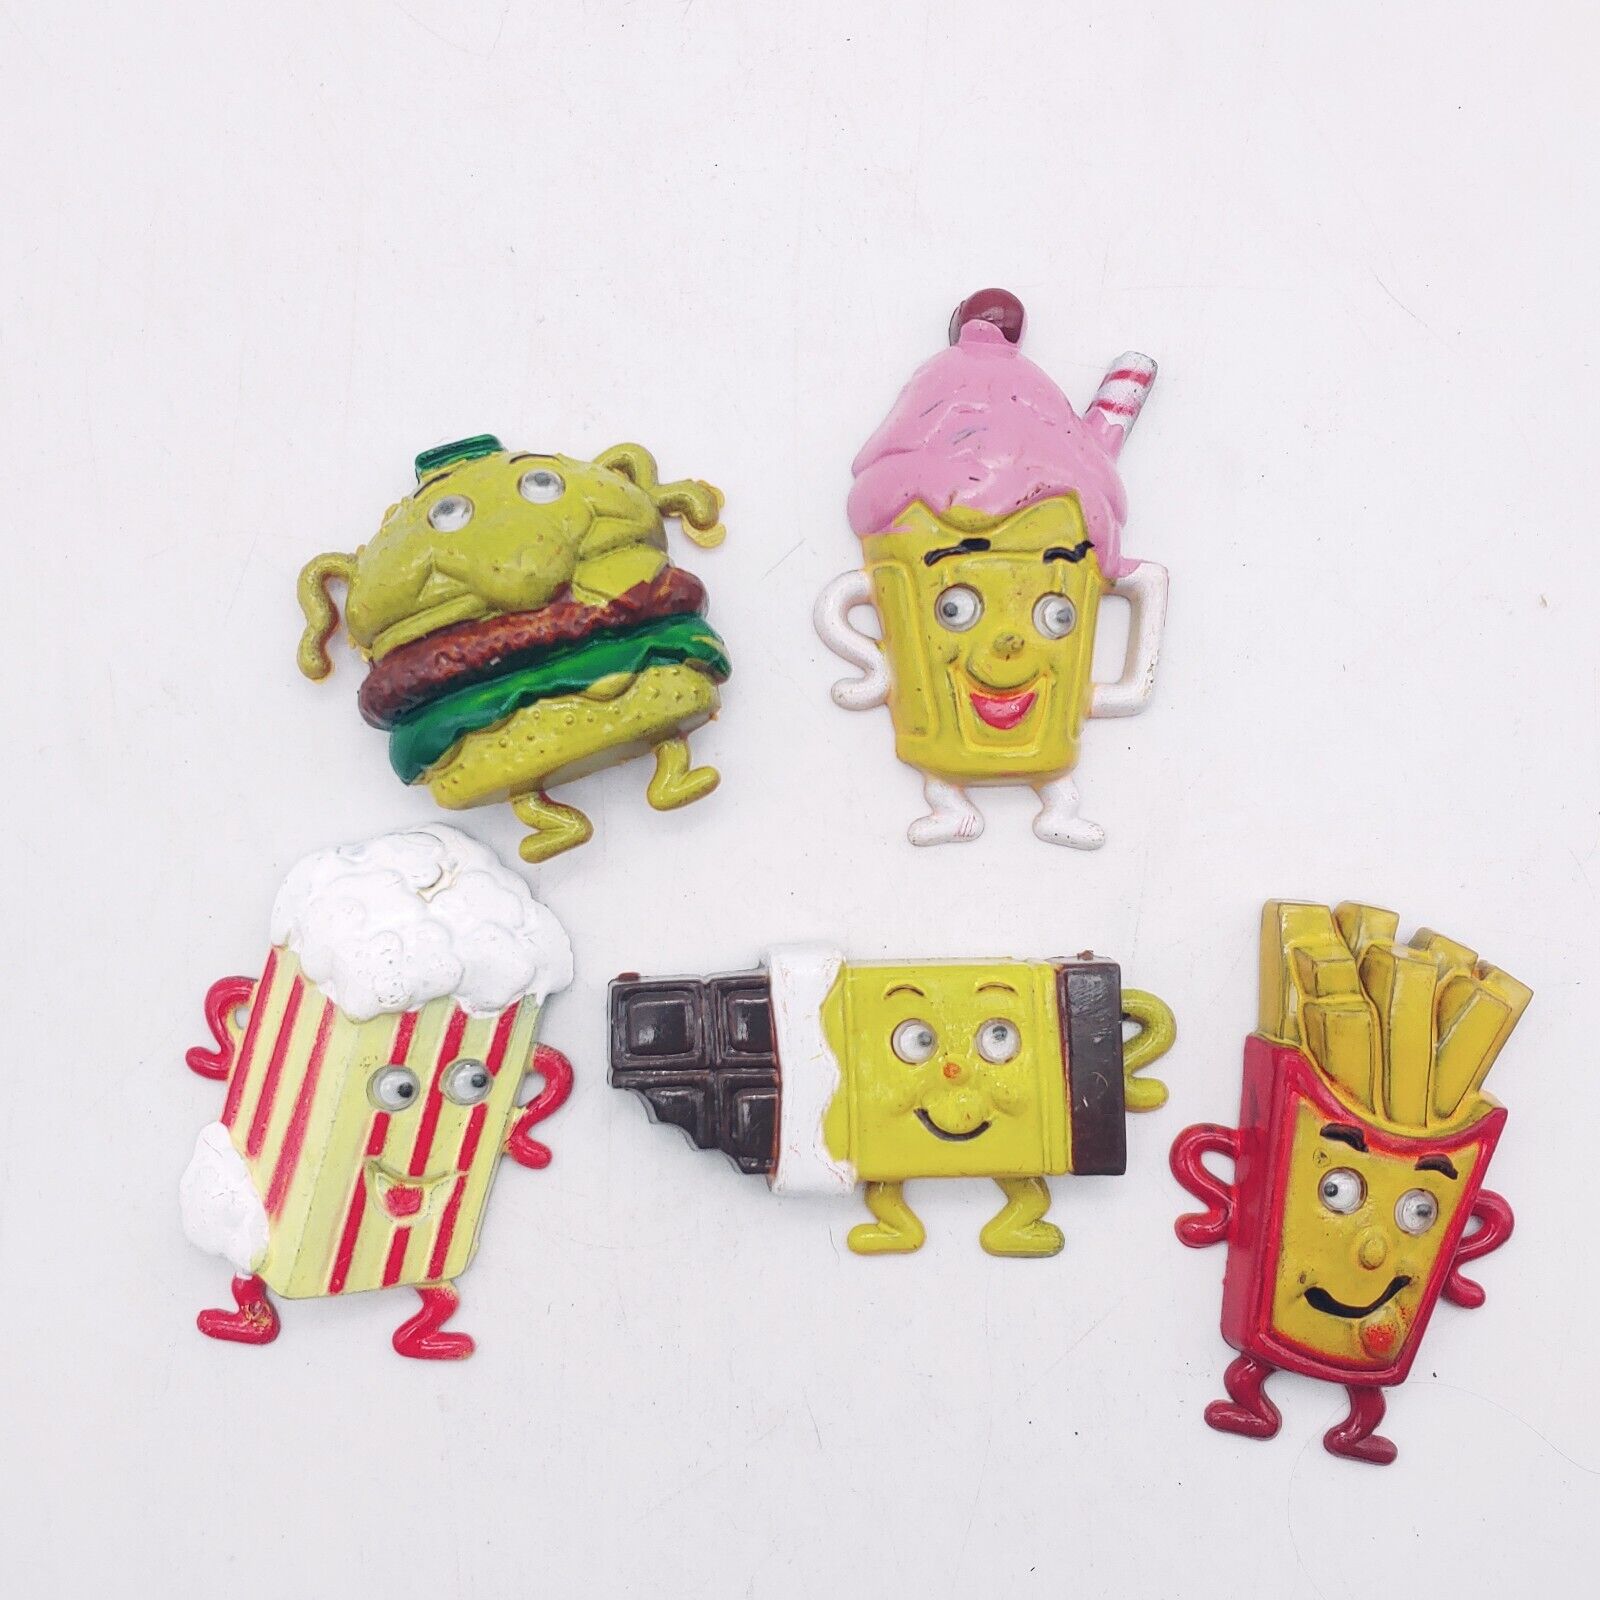 Vintage Giftco Inc Set of 5 Junk Food Refrigerator Magnets With Googley Eyes